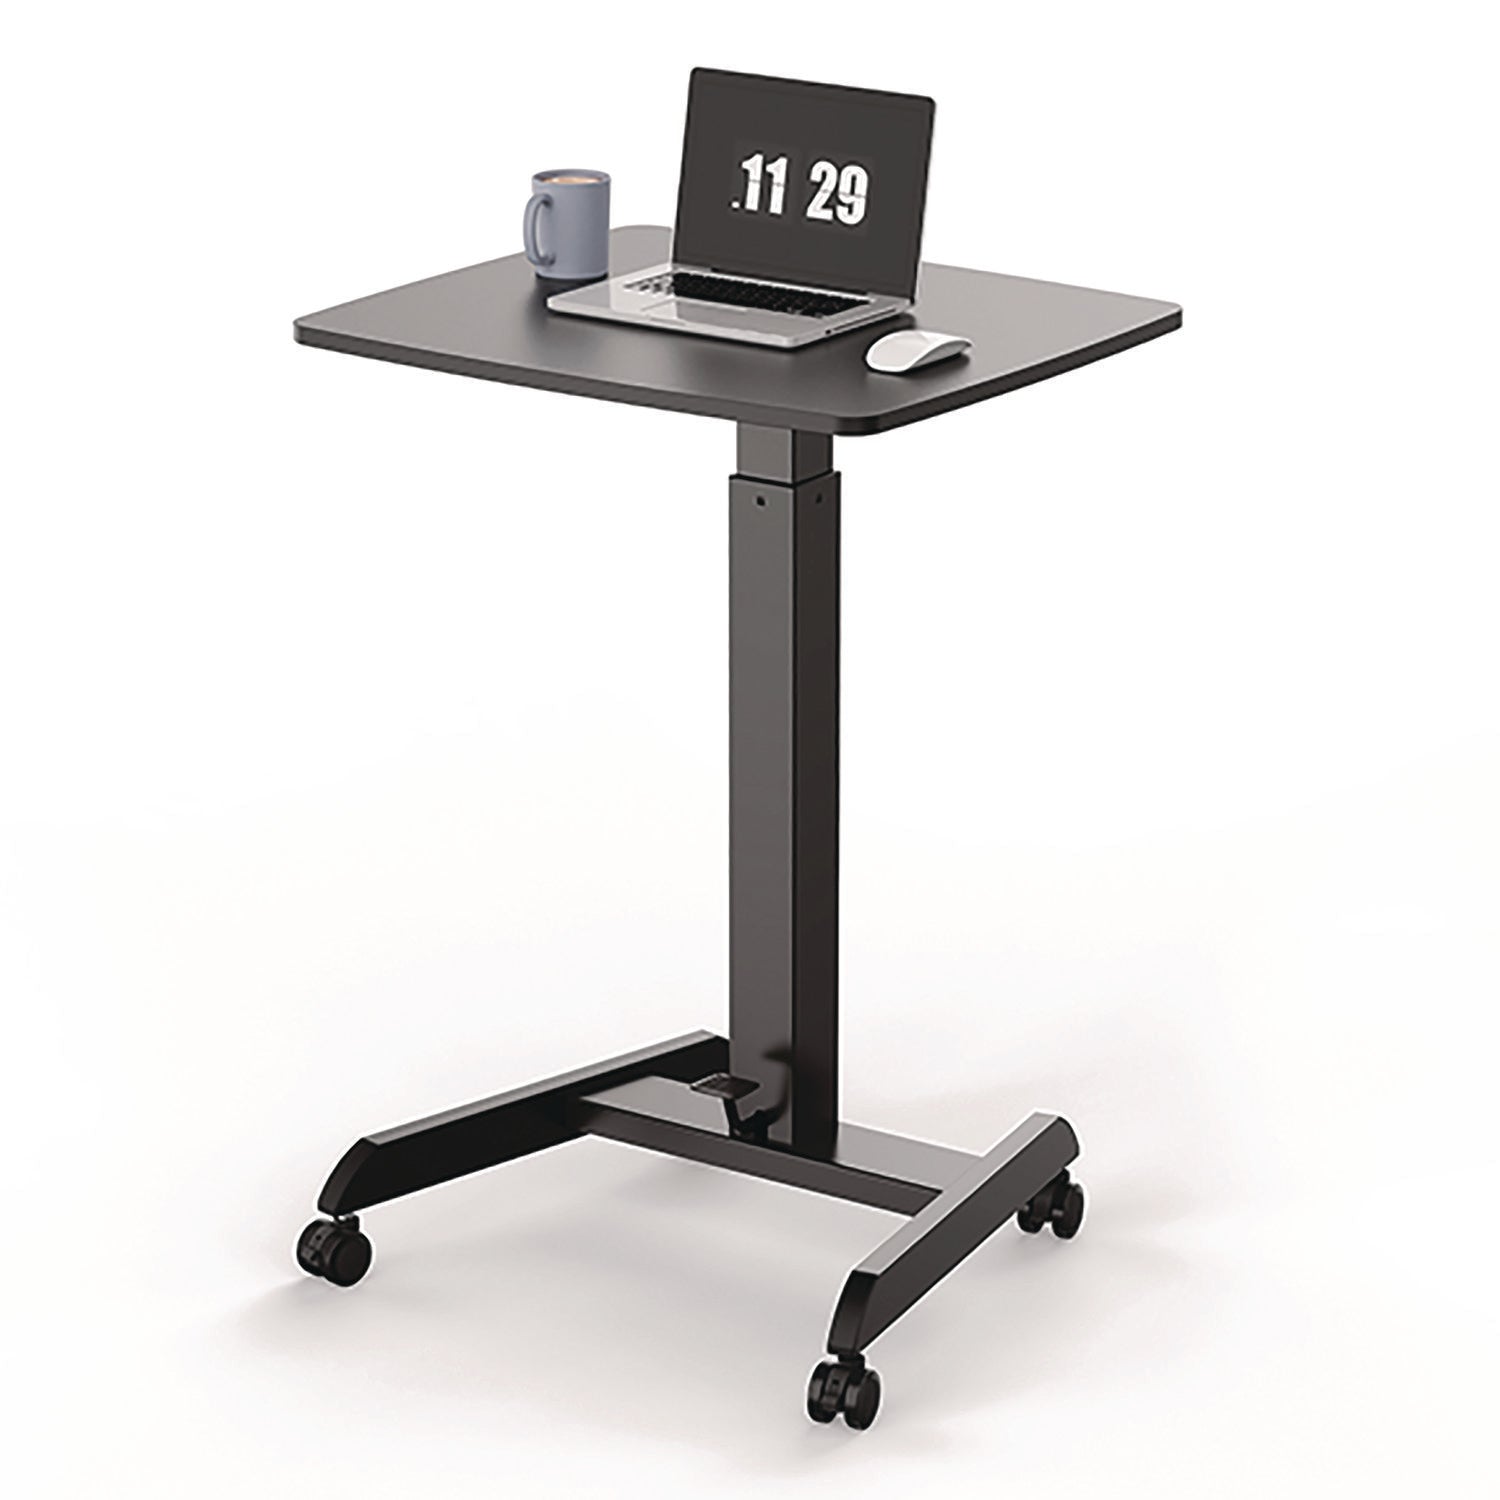 mobile-sit-to-stand-desk-235-x-205-x-2975-to-4425-black_ktksts300b - 2